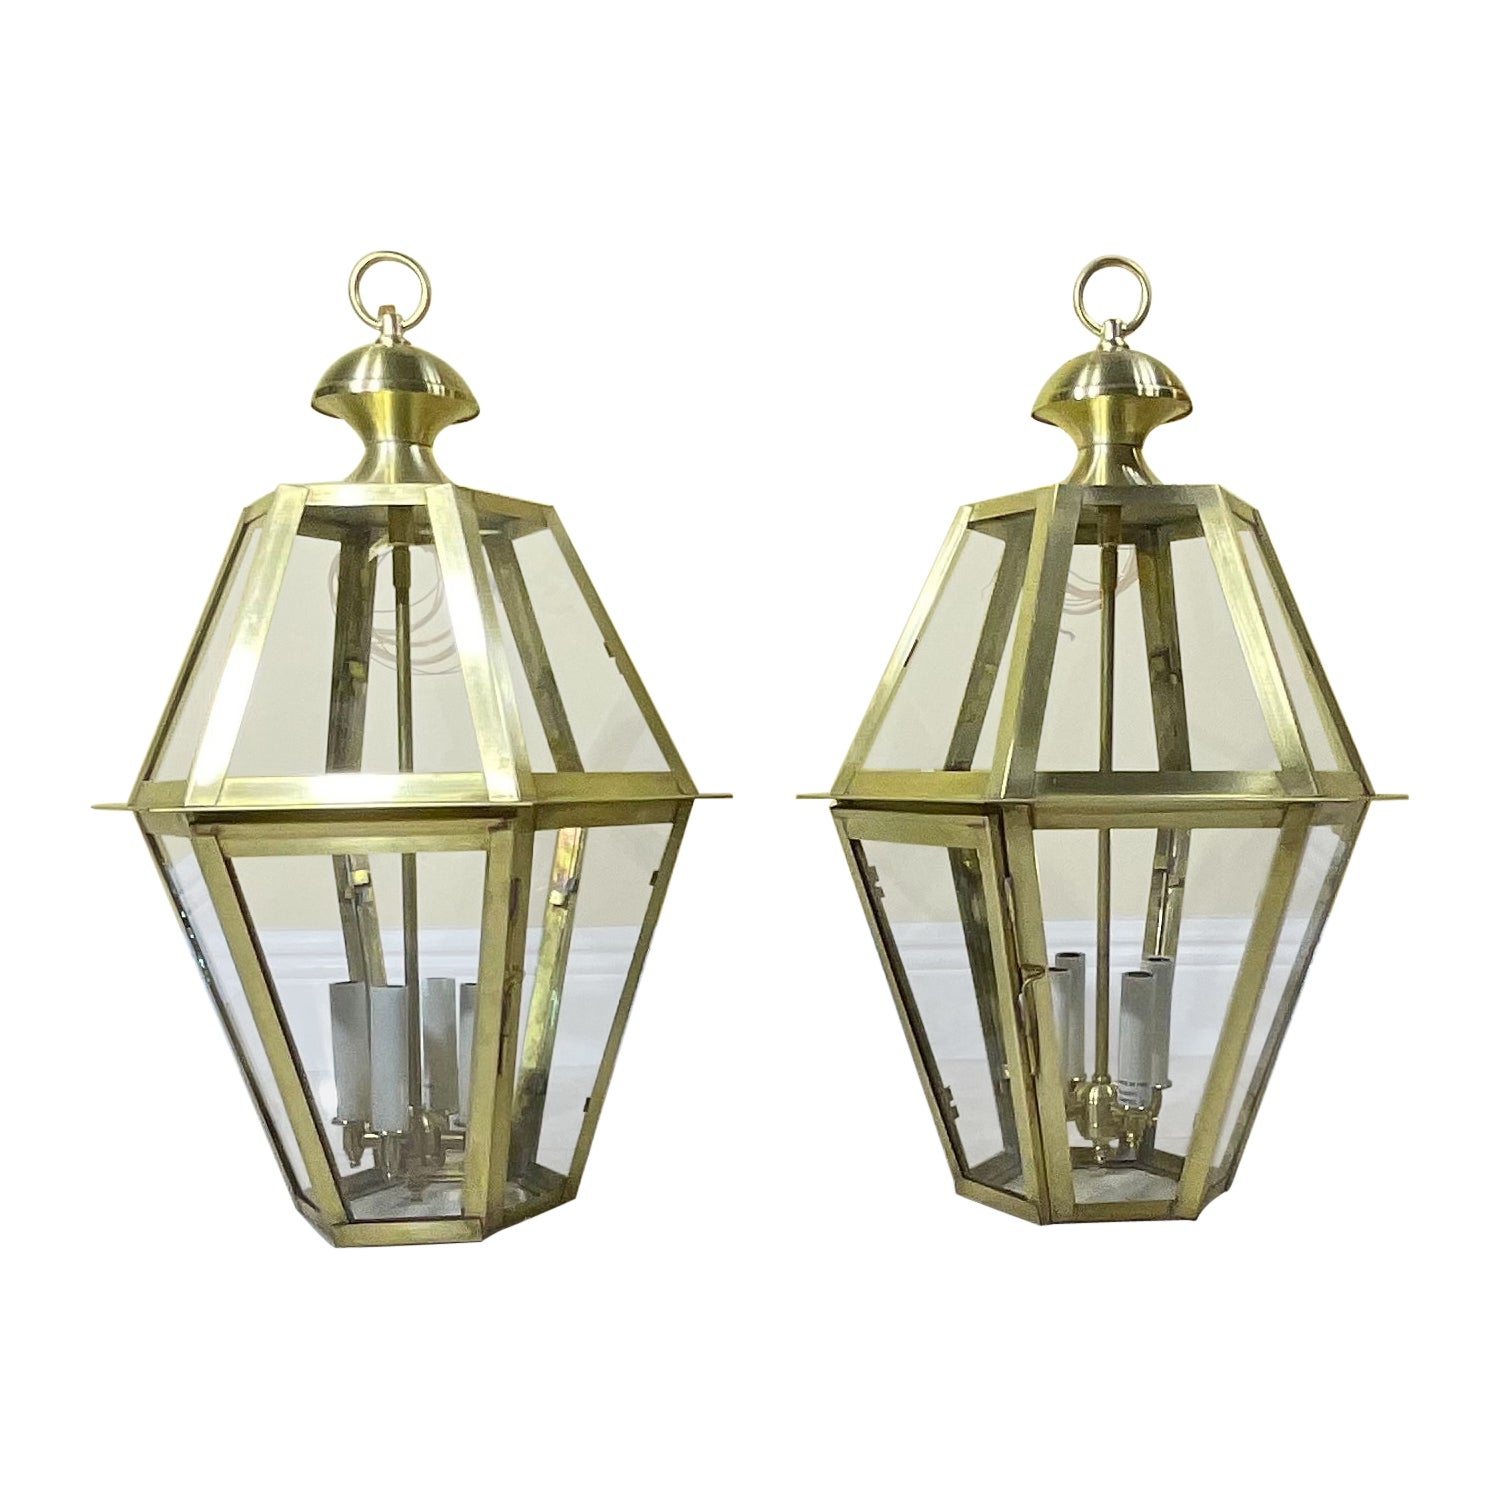 Pair Of Six Sides Solid  Brass Handcrafted Hanging Lanterns